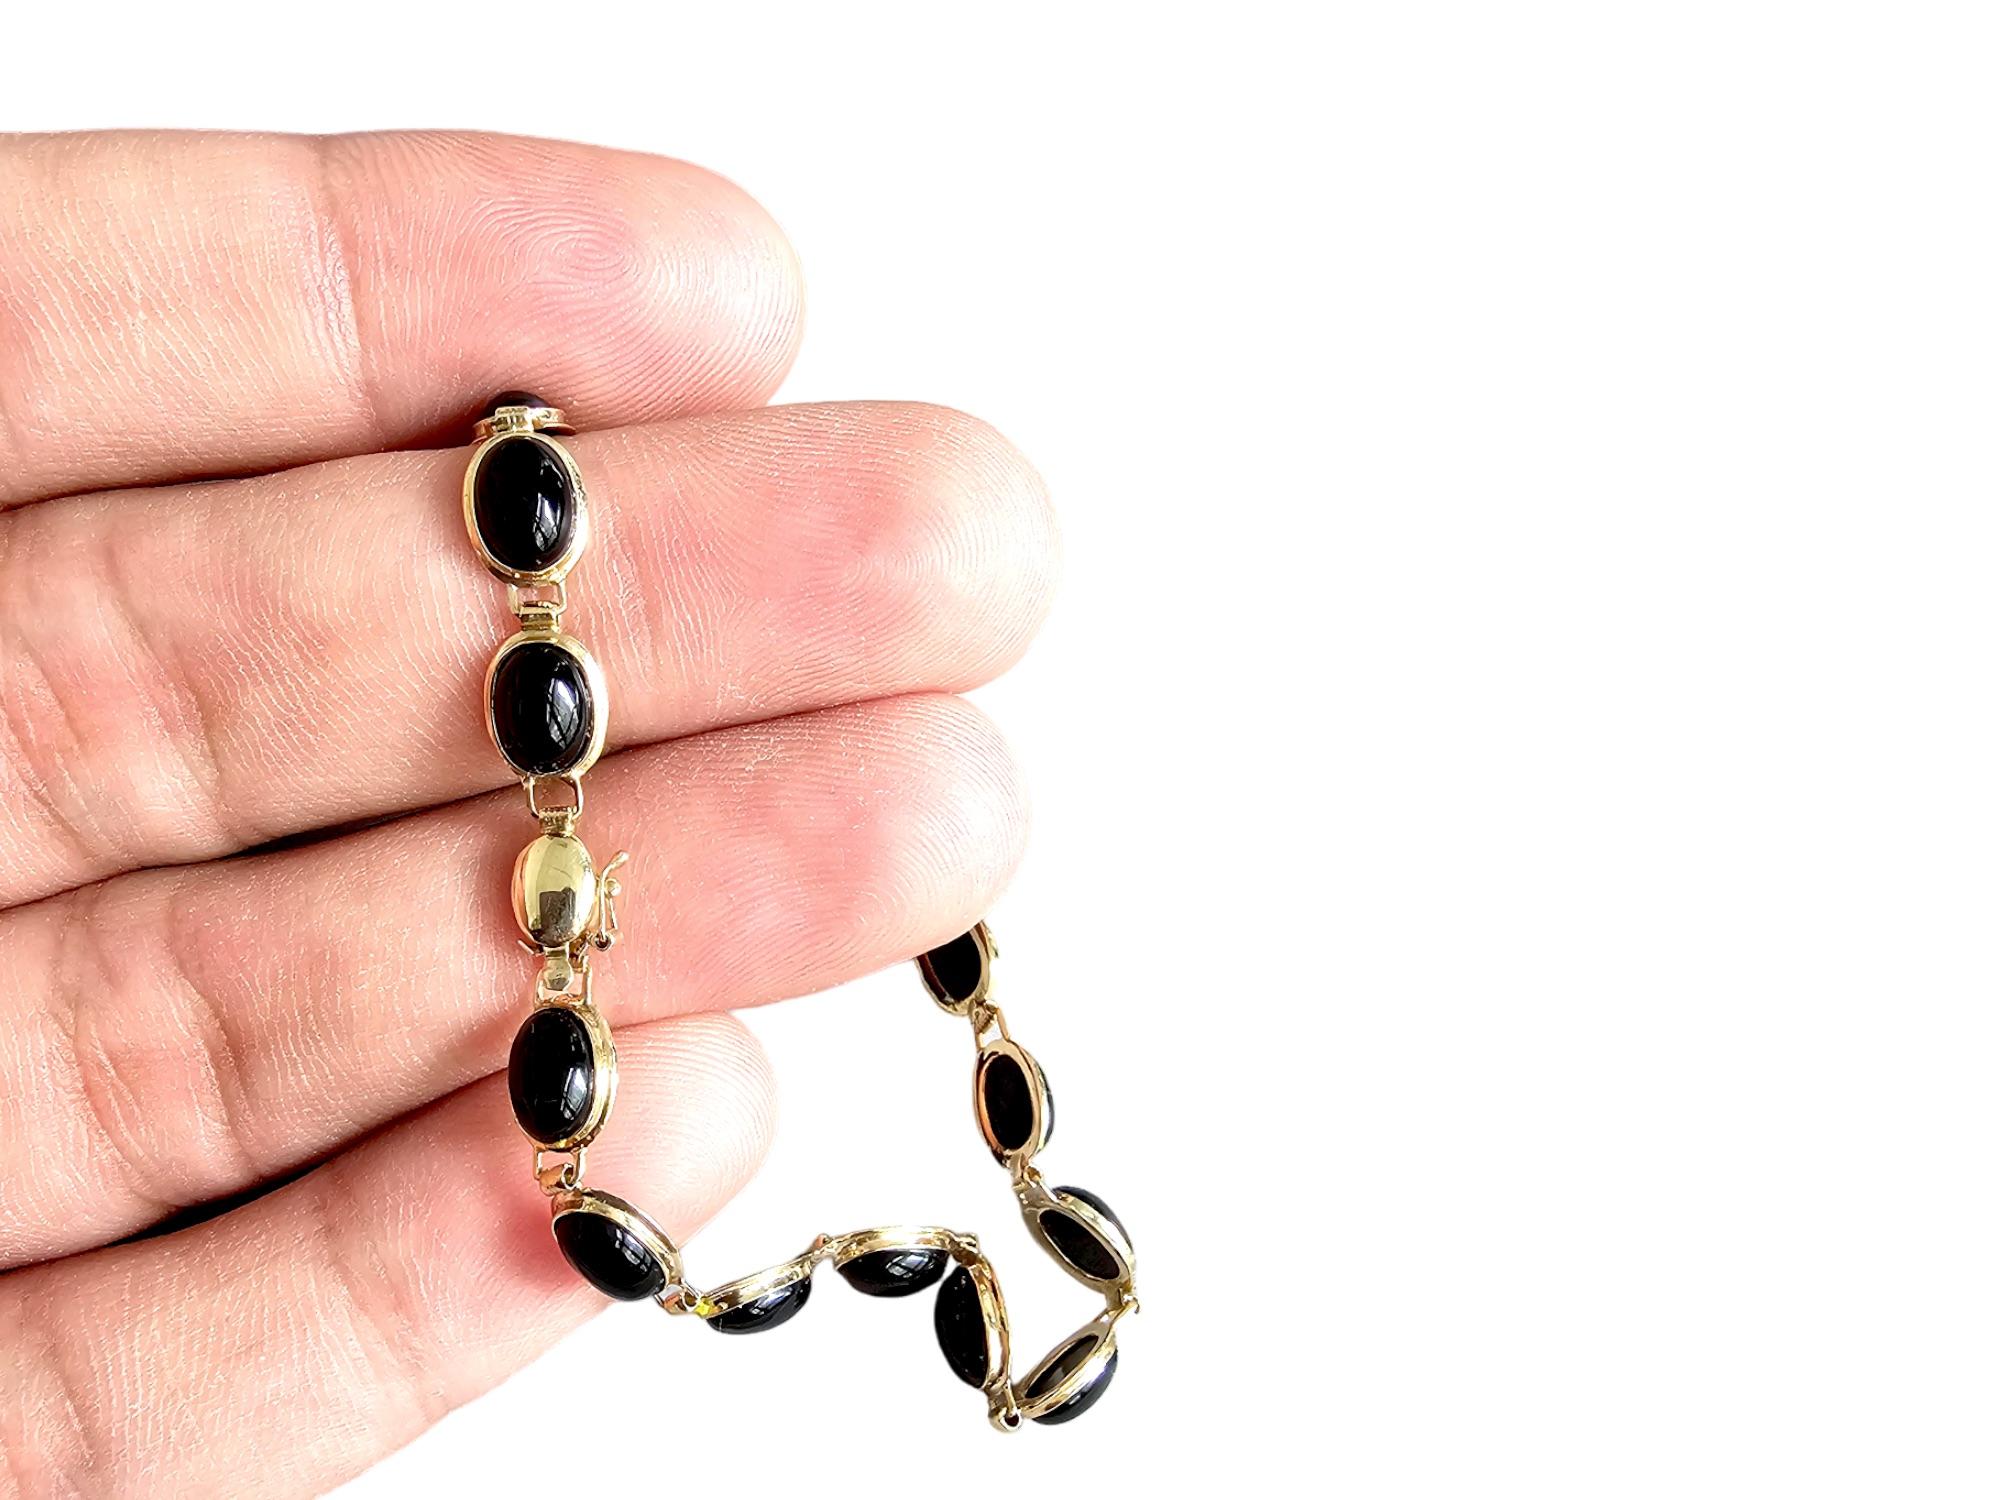 Tibetan Black Onyx Beaded Bracelet (with 14K Solid Yellow Gold) For Sale 6